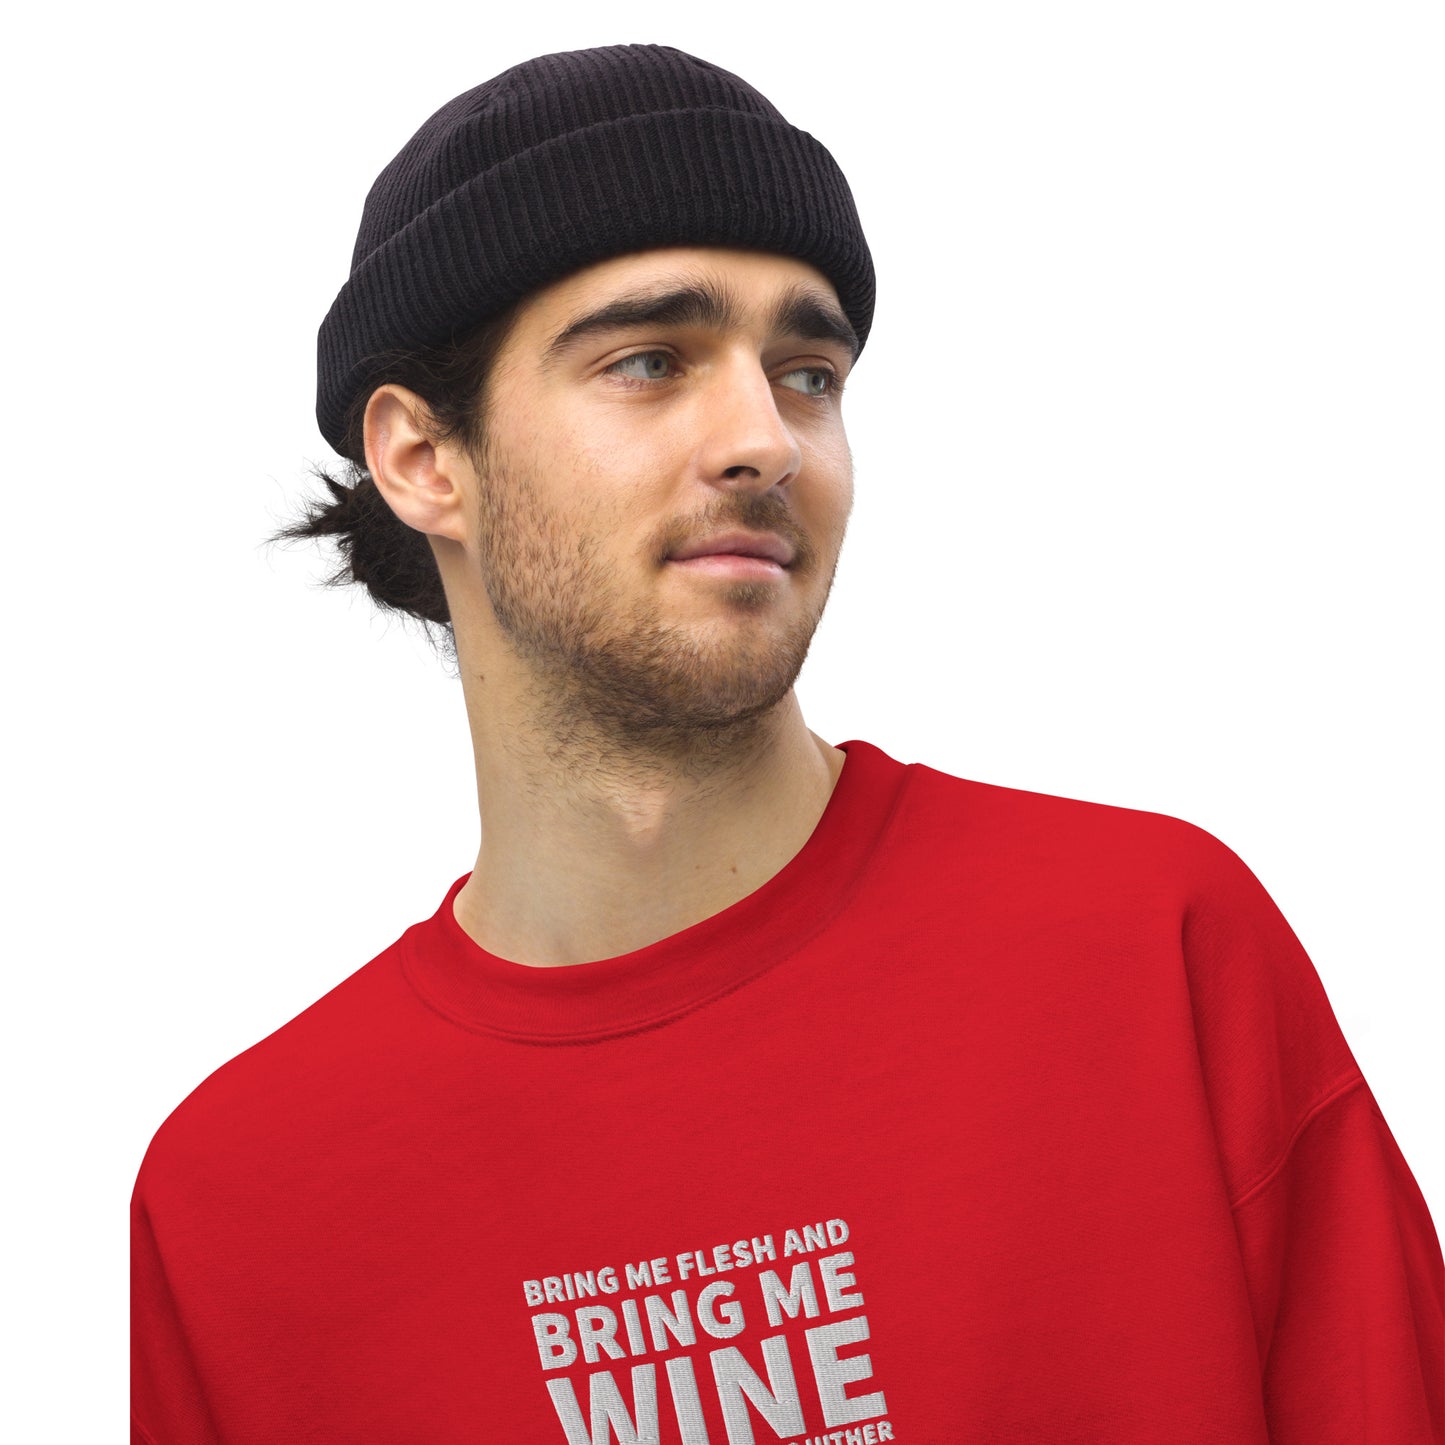 Bring me Wine (Signature Collection)